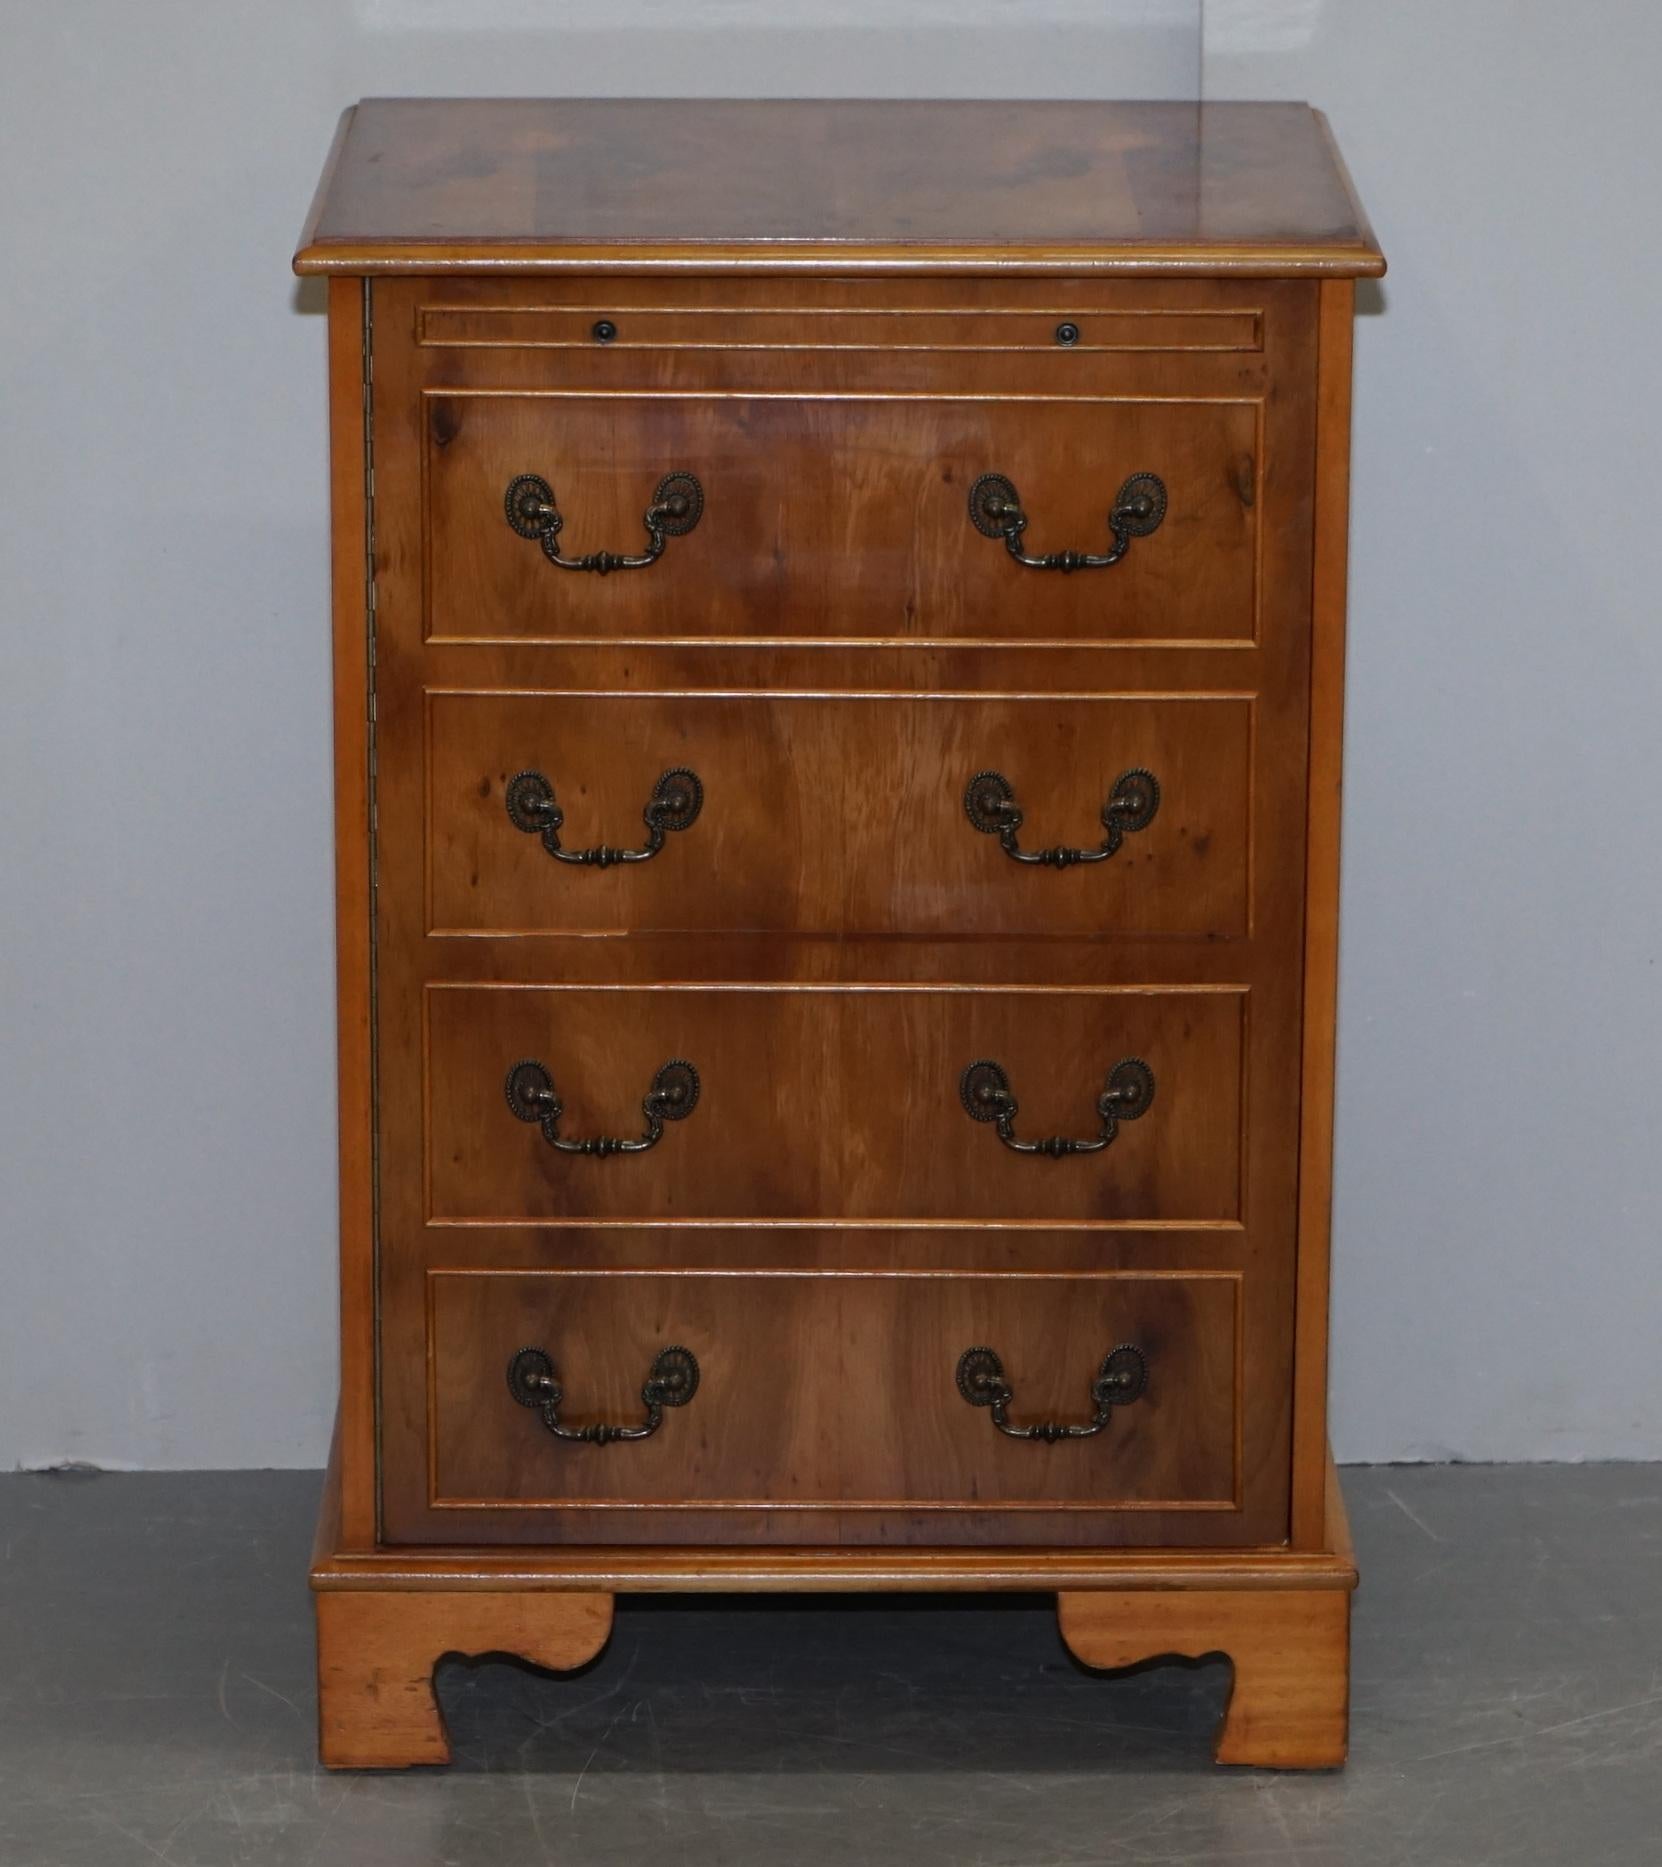 We are delighted to this lovely Record Player burr yew wood cupboard which is hidden as a Regency style chest of drawers

A very well made and decorative piece of metamorphic furniture, the top rises to reveal a space to hold a record player, the